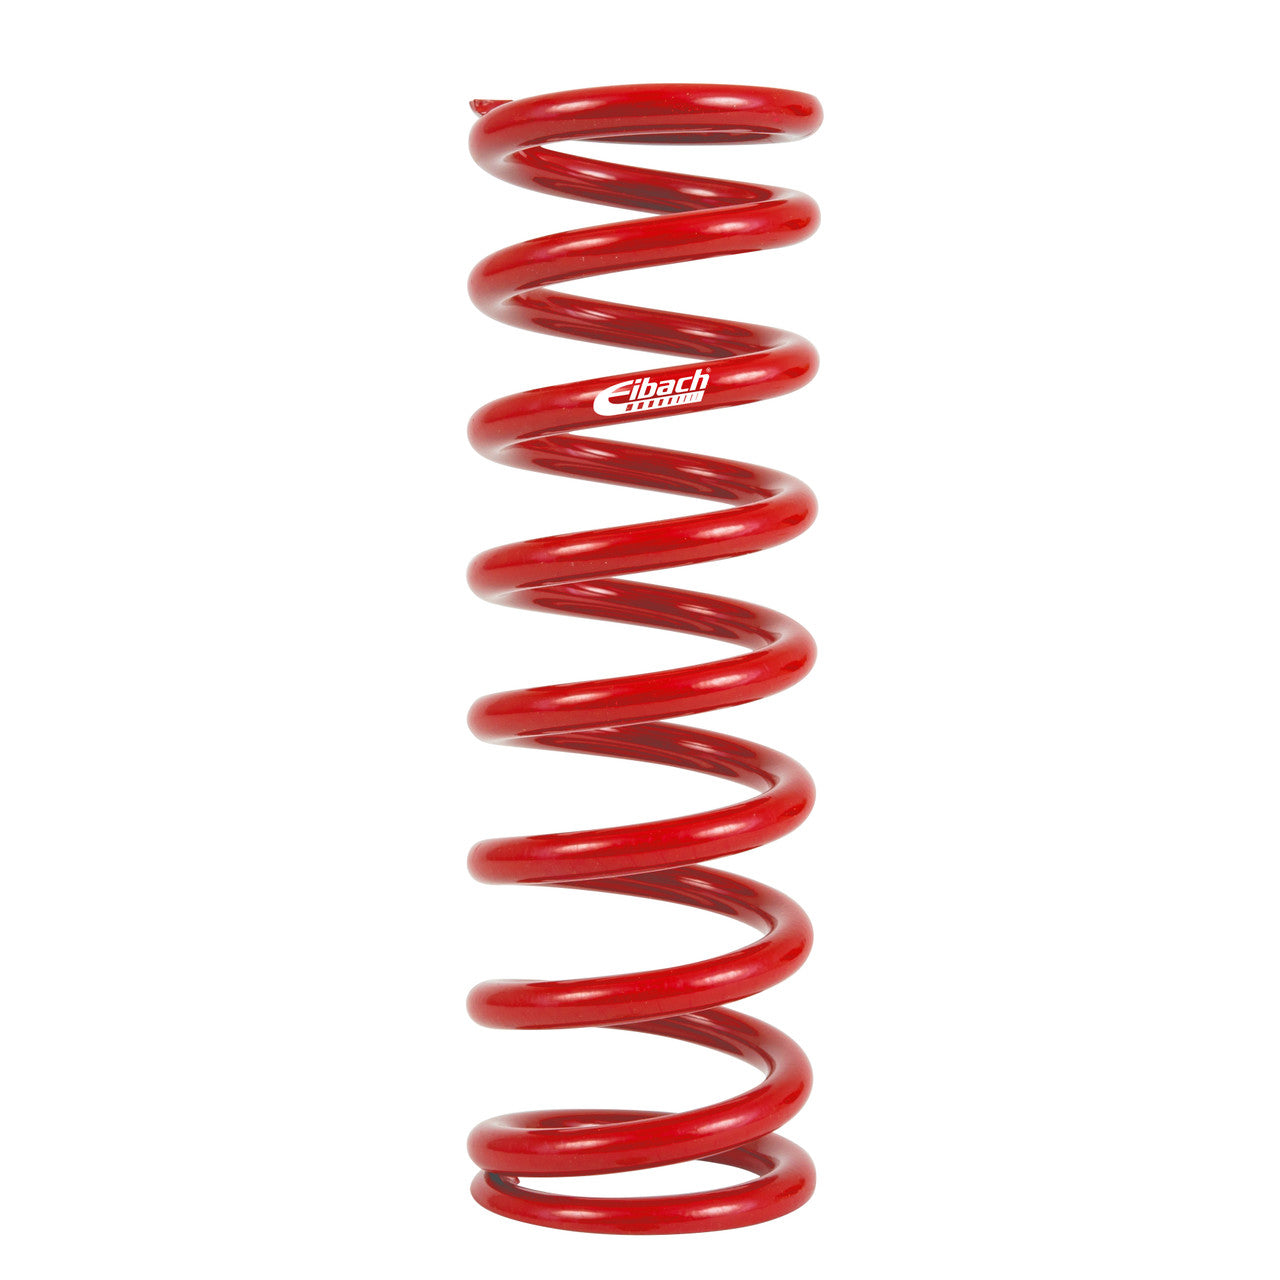 Eibach Metric Coilover Spring - 70MM I.D. 300-70-0030